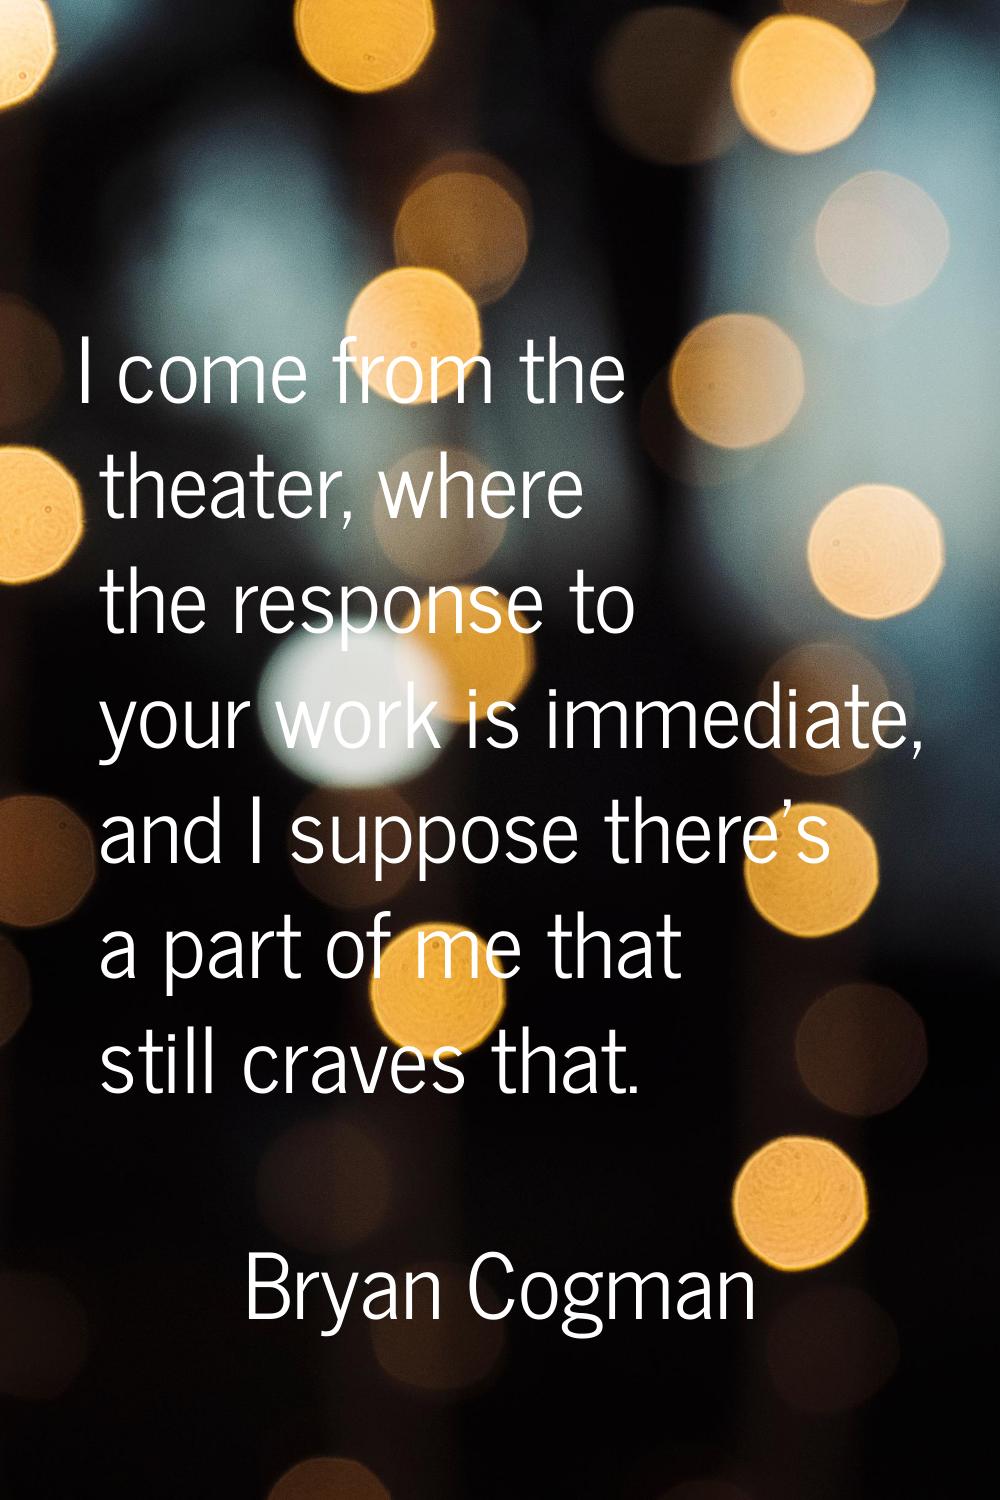 I come from the theater, where the response to your work is immediate, and I suppose there's a part